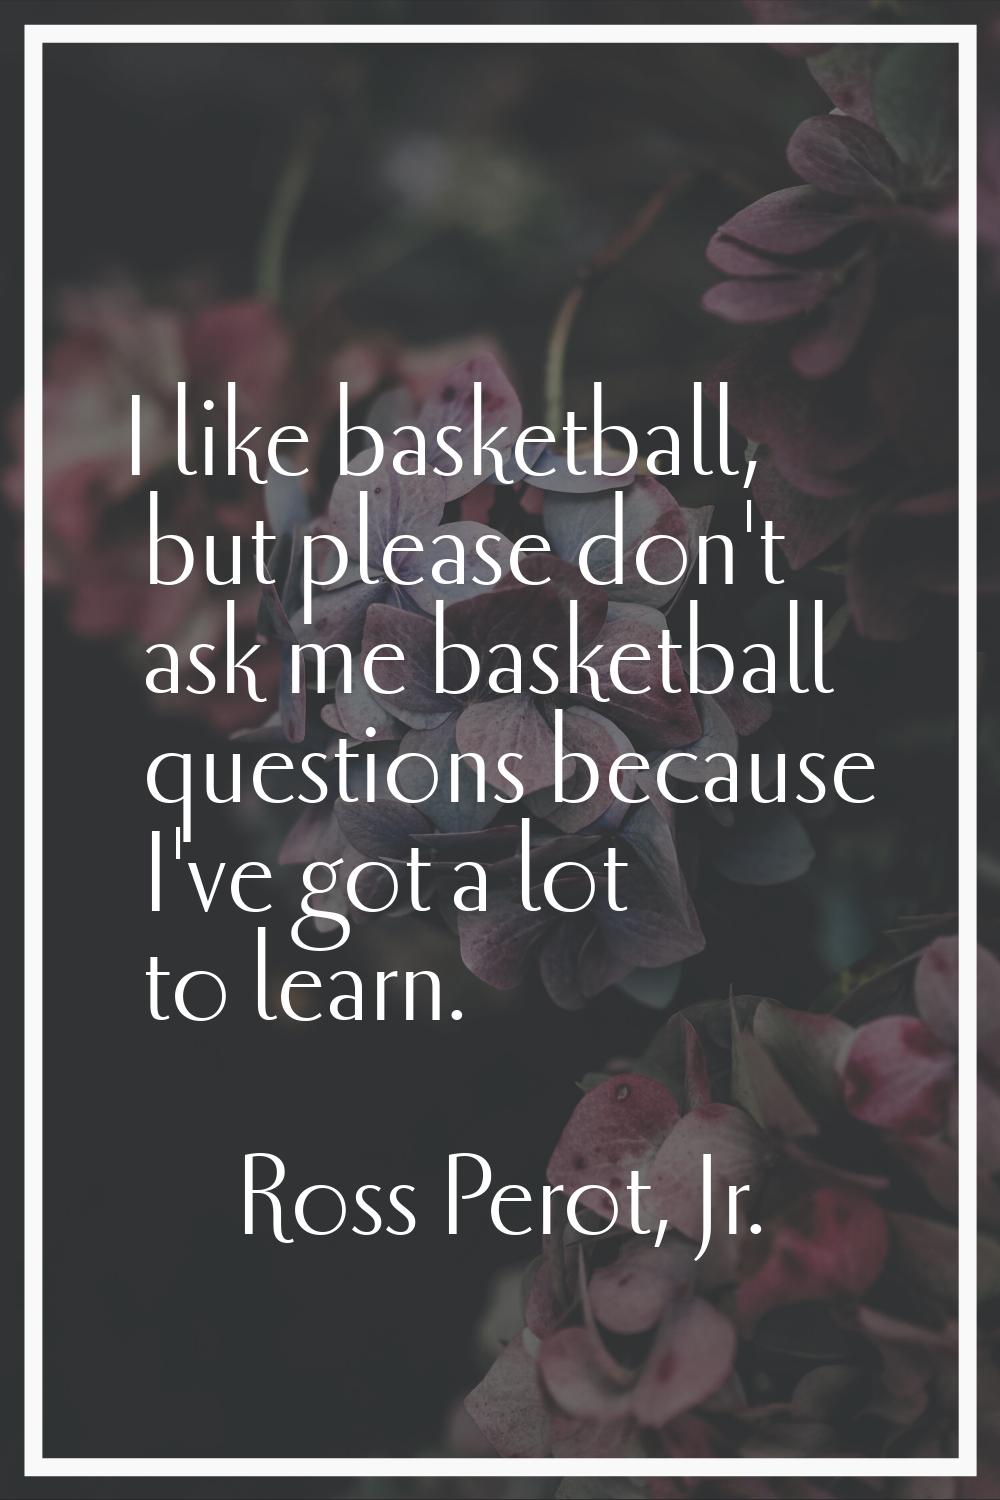 I like basketball, but please don't ask me basketball questions because I've got a lot to learn.